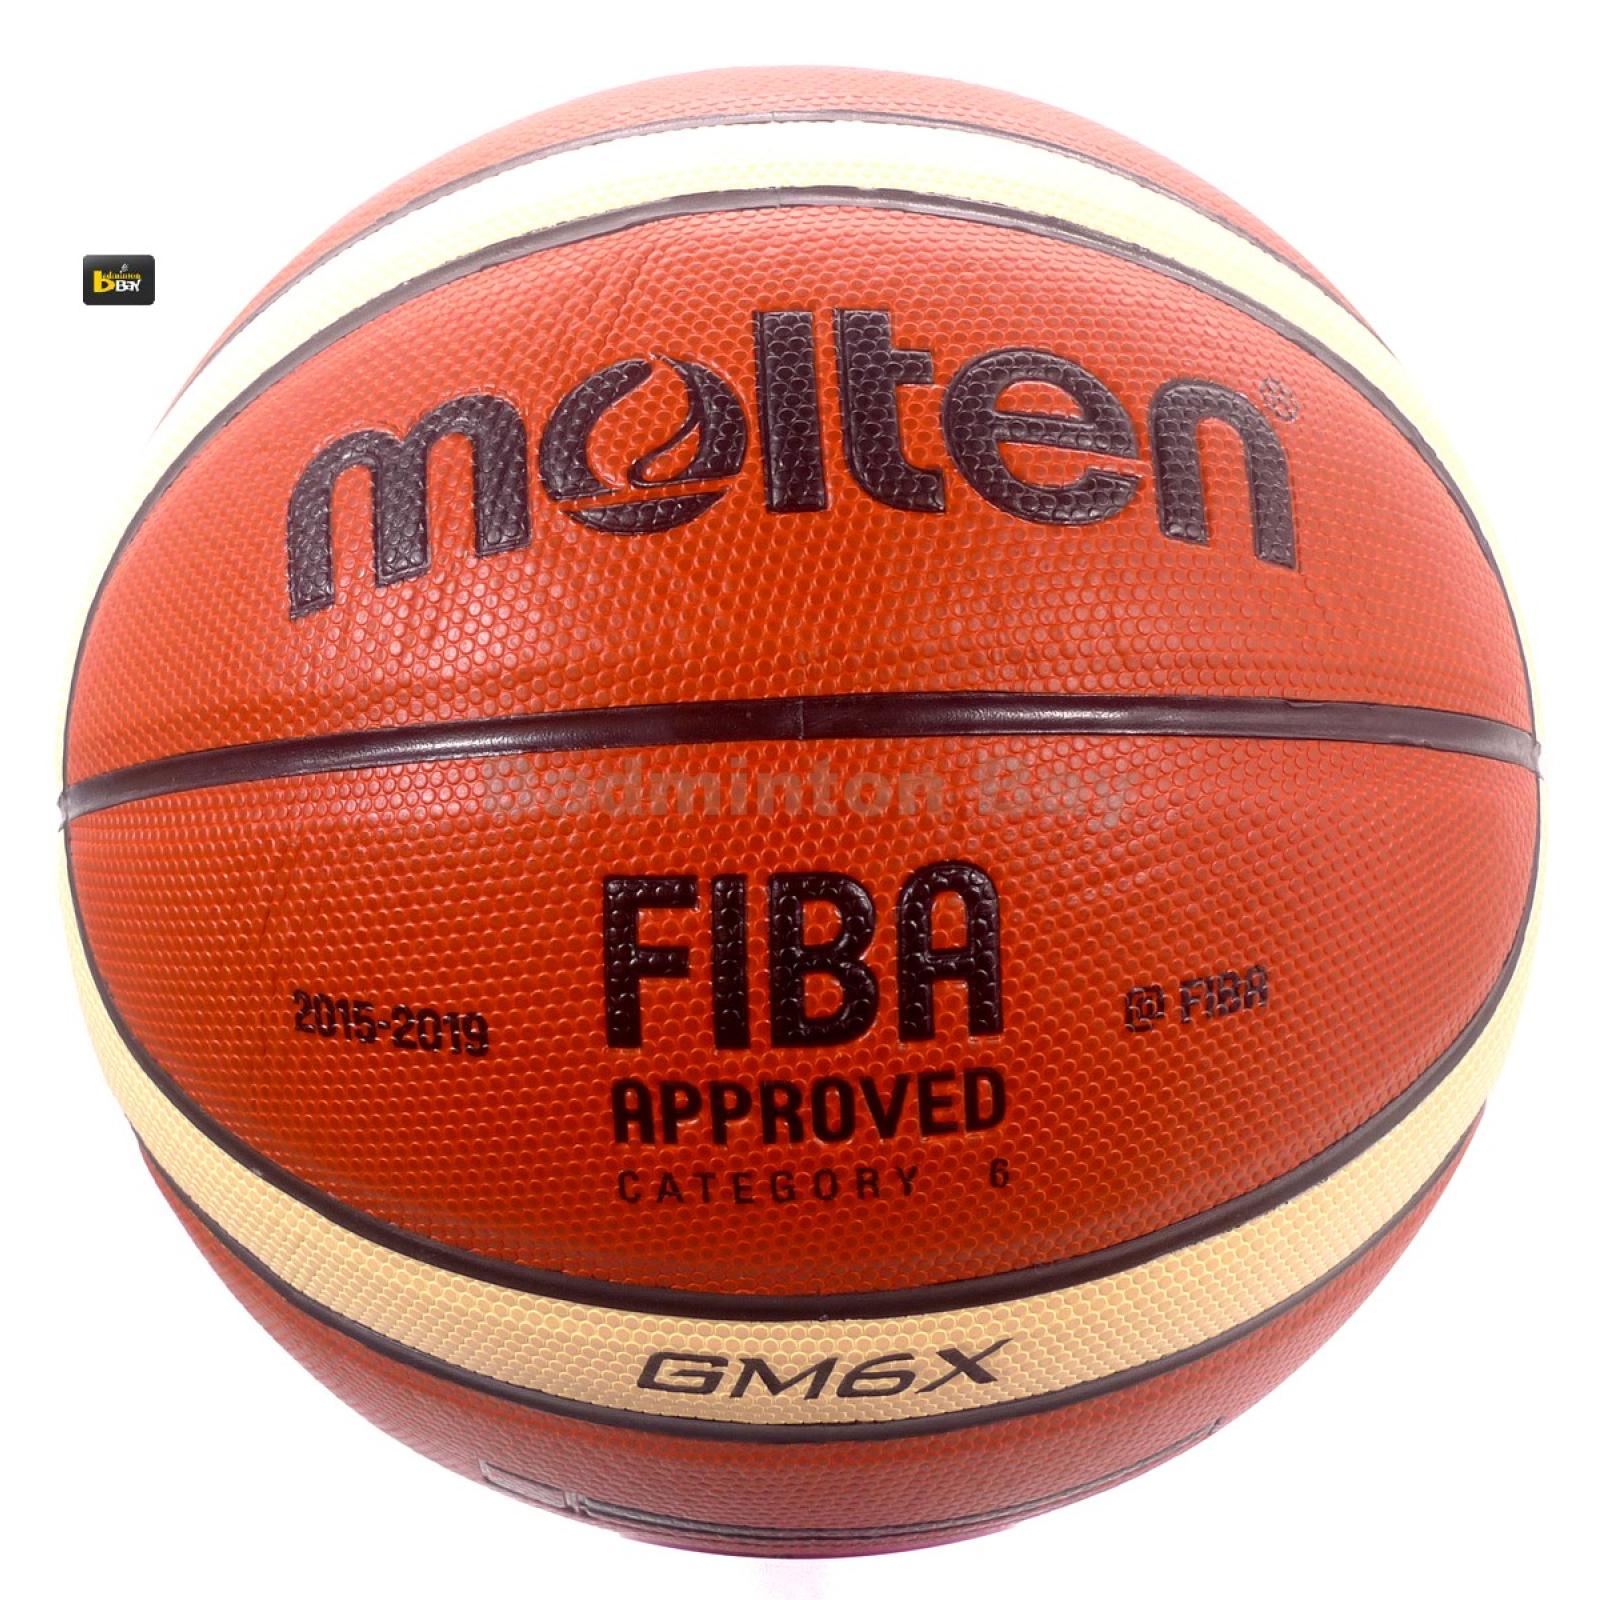 Molten Indoor Outdoor Basketball GMX Fiba Synthetic Leather GM7X GM6X GM5X C CL 